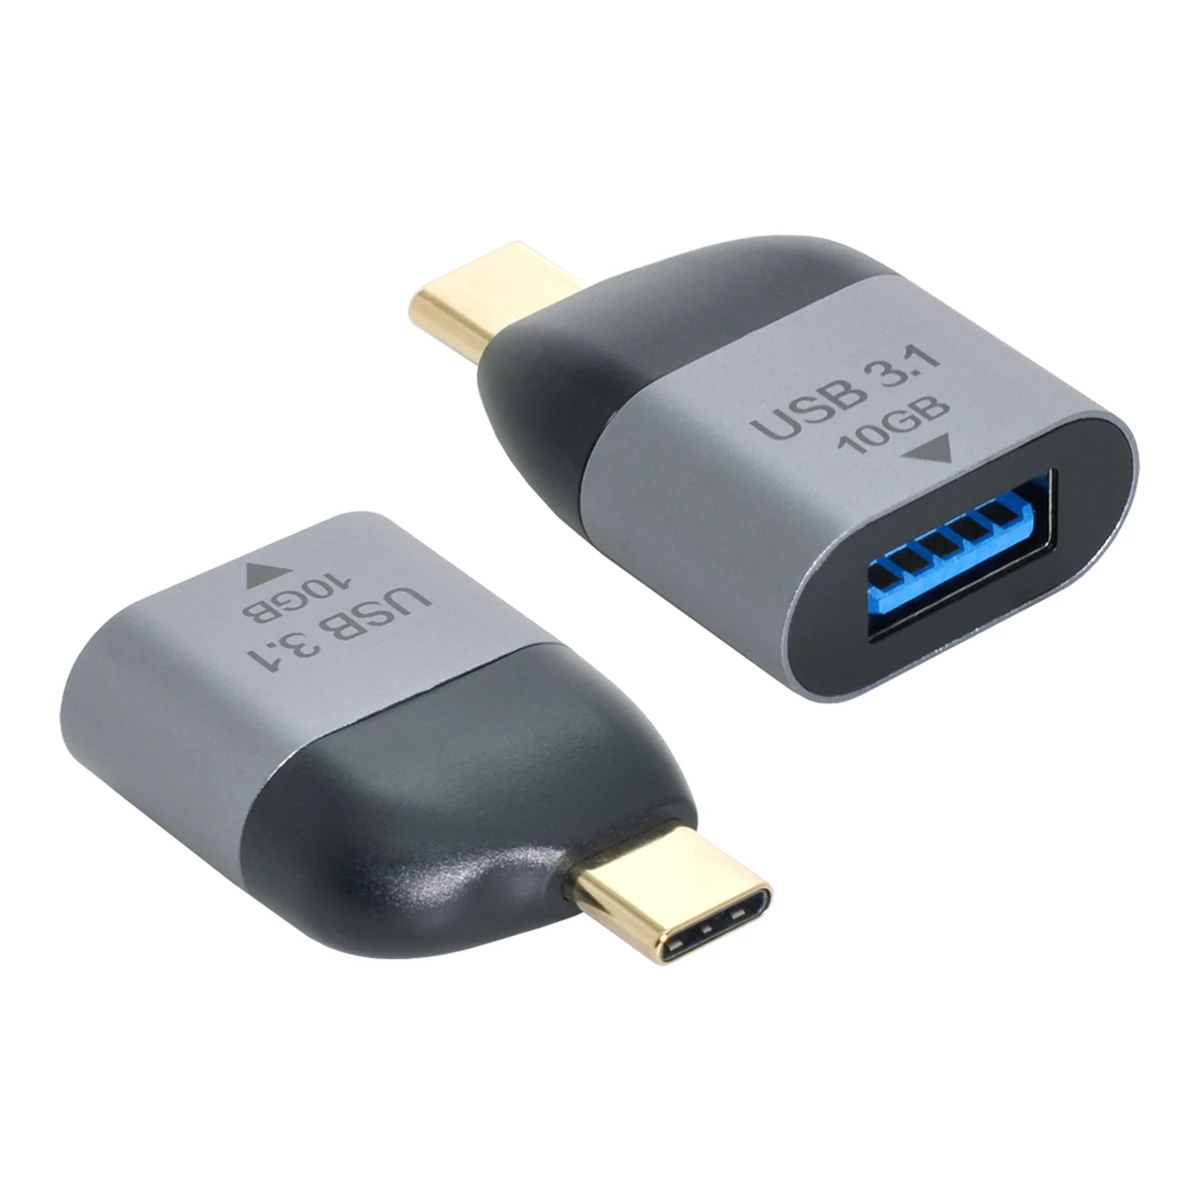 

USB 3.1 Type C Male Host to USB3.0 Type A Female OTG Data 10Gbps Adapter for Laptop & Phone